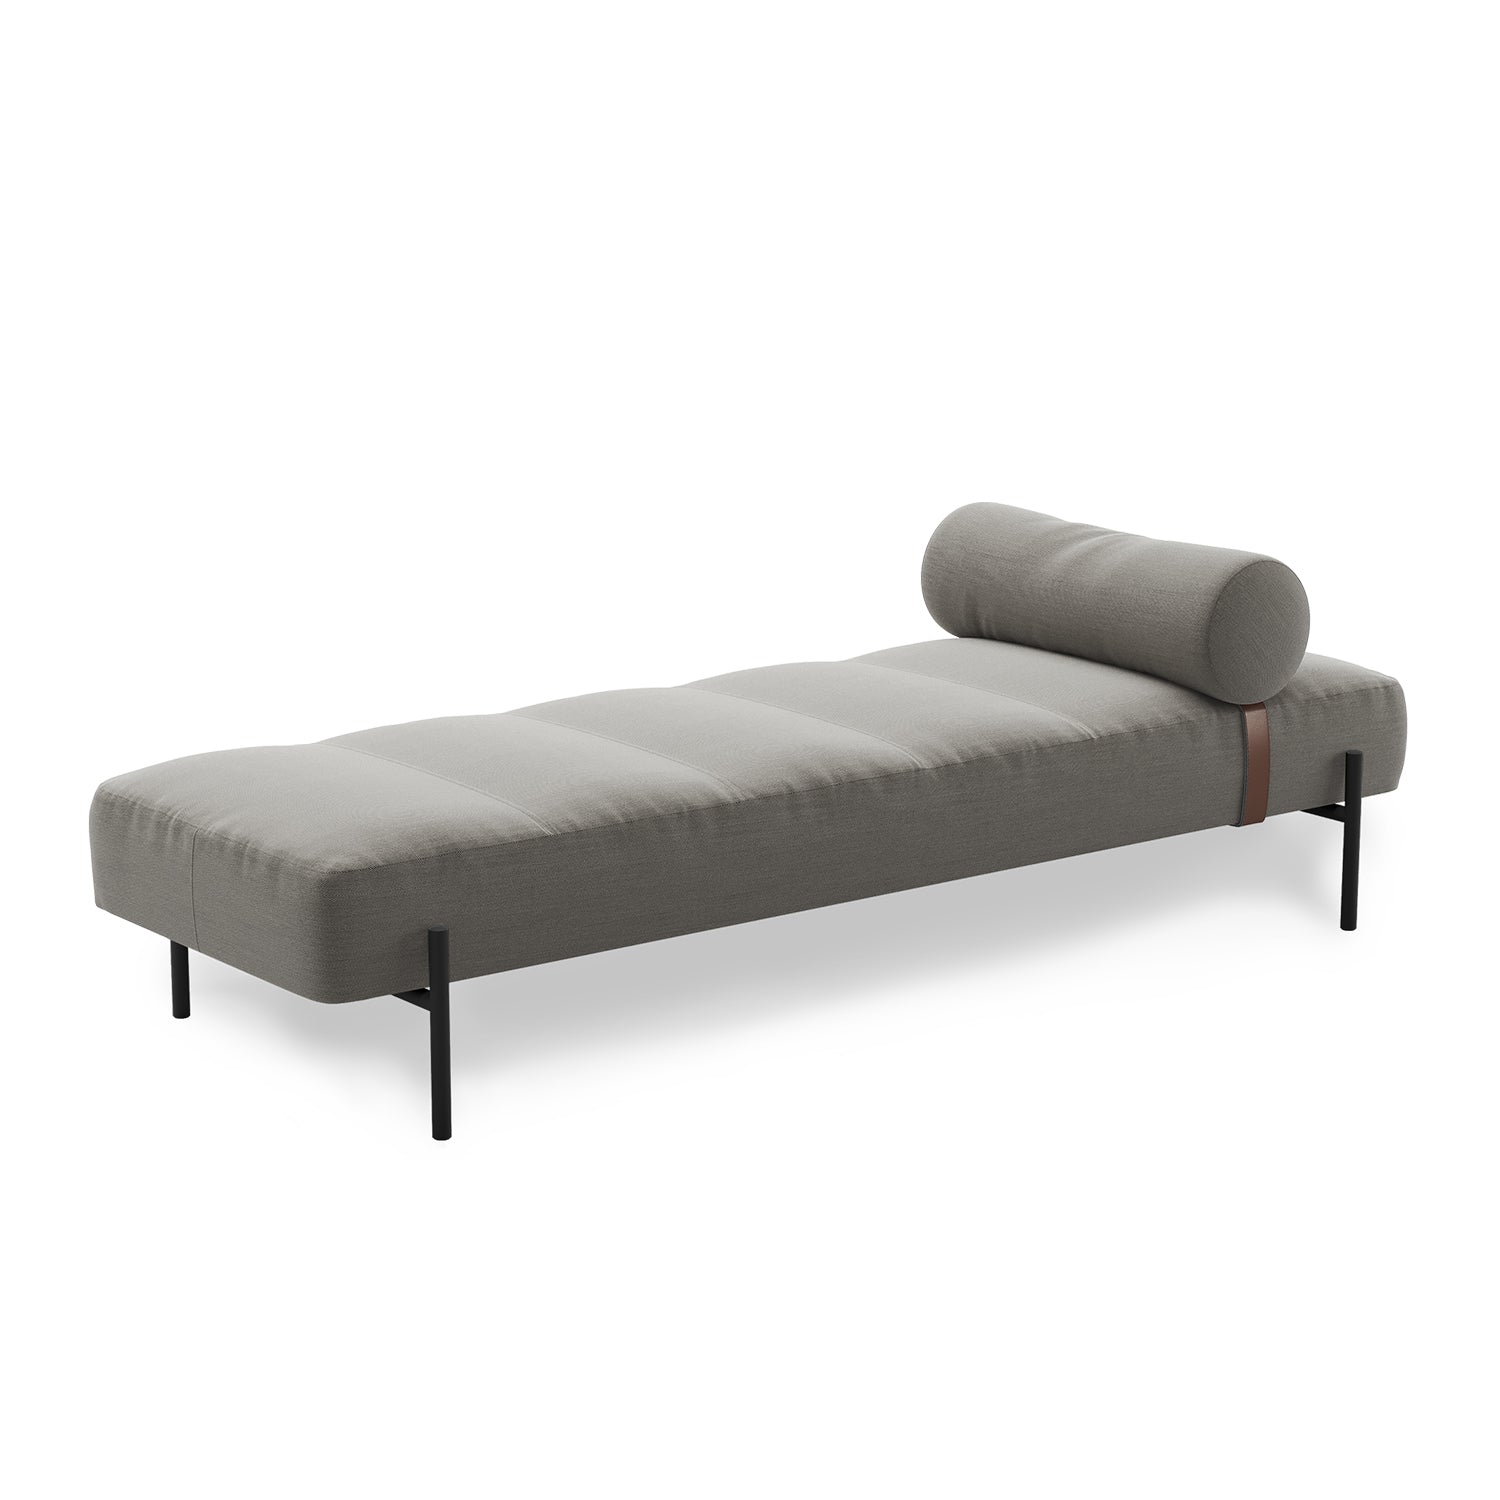 Northern Daybe Daybed in Steelcut Trio 124 and Black legs